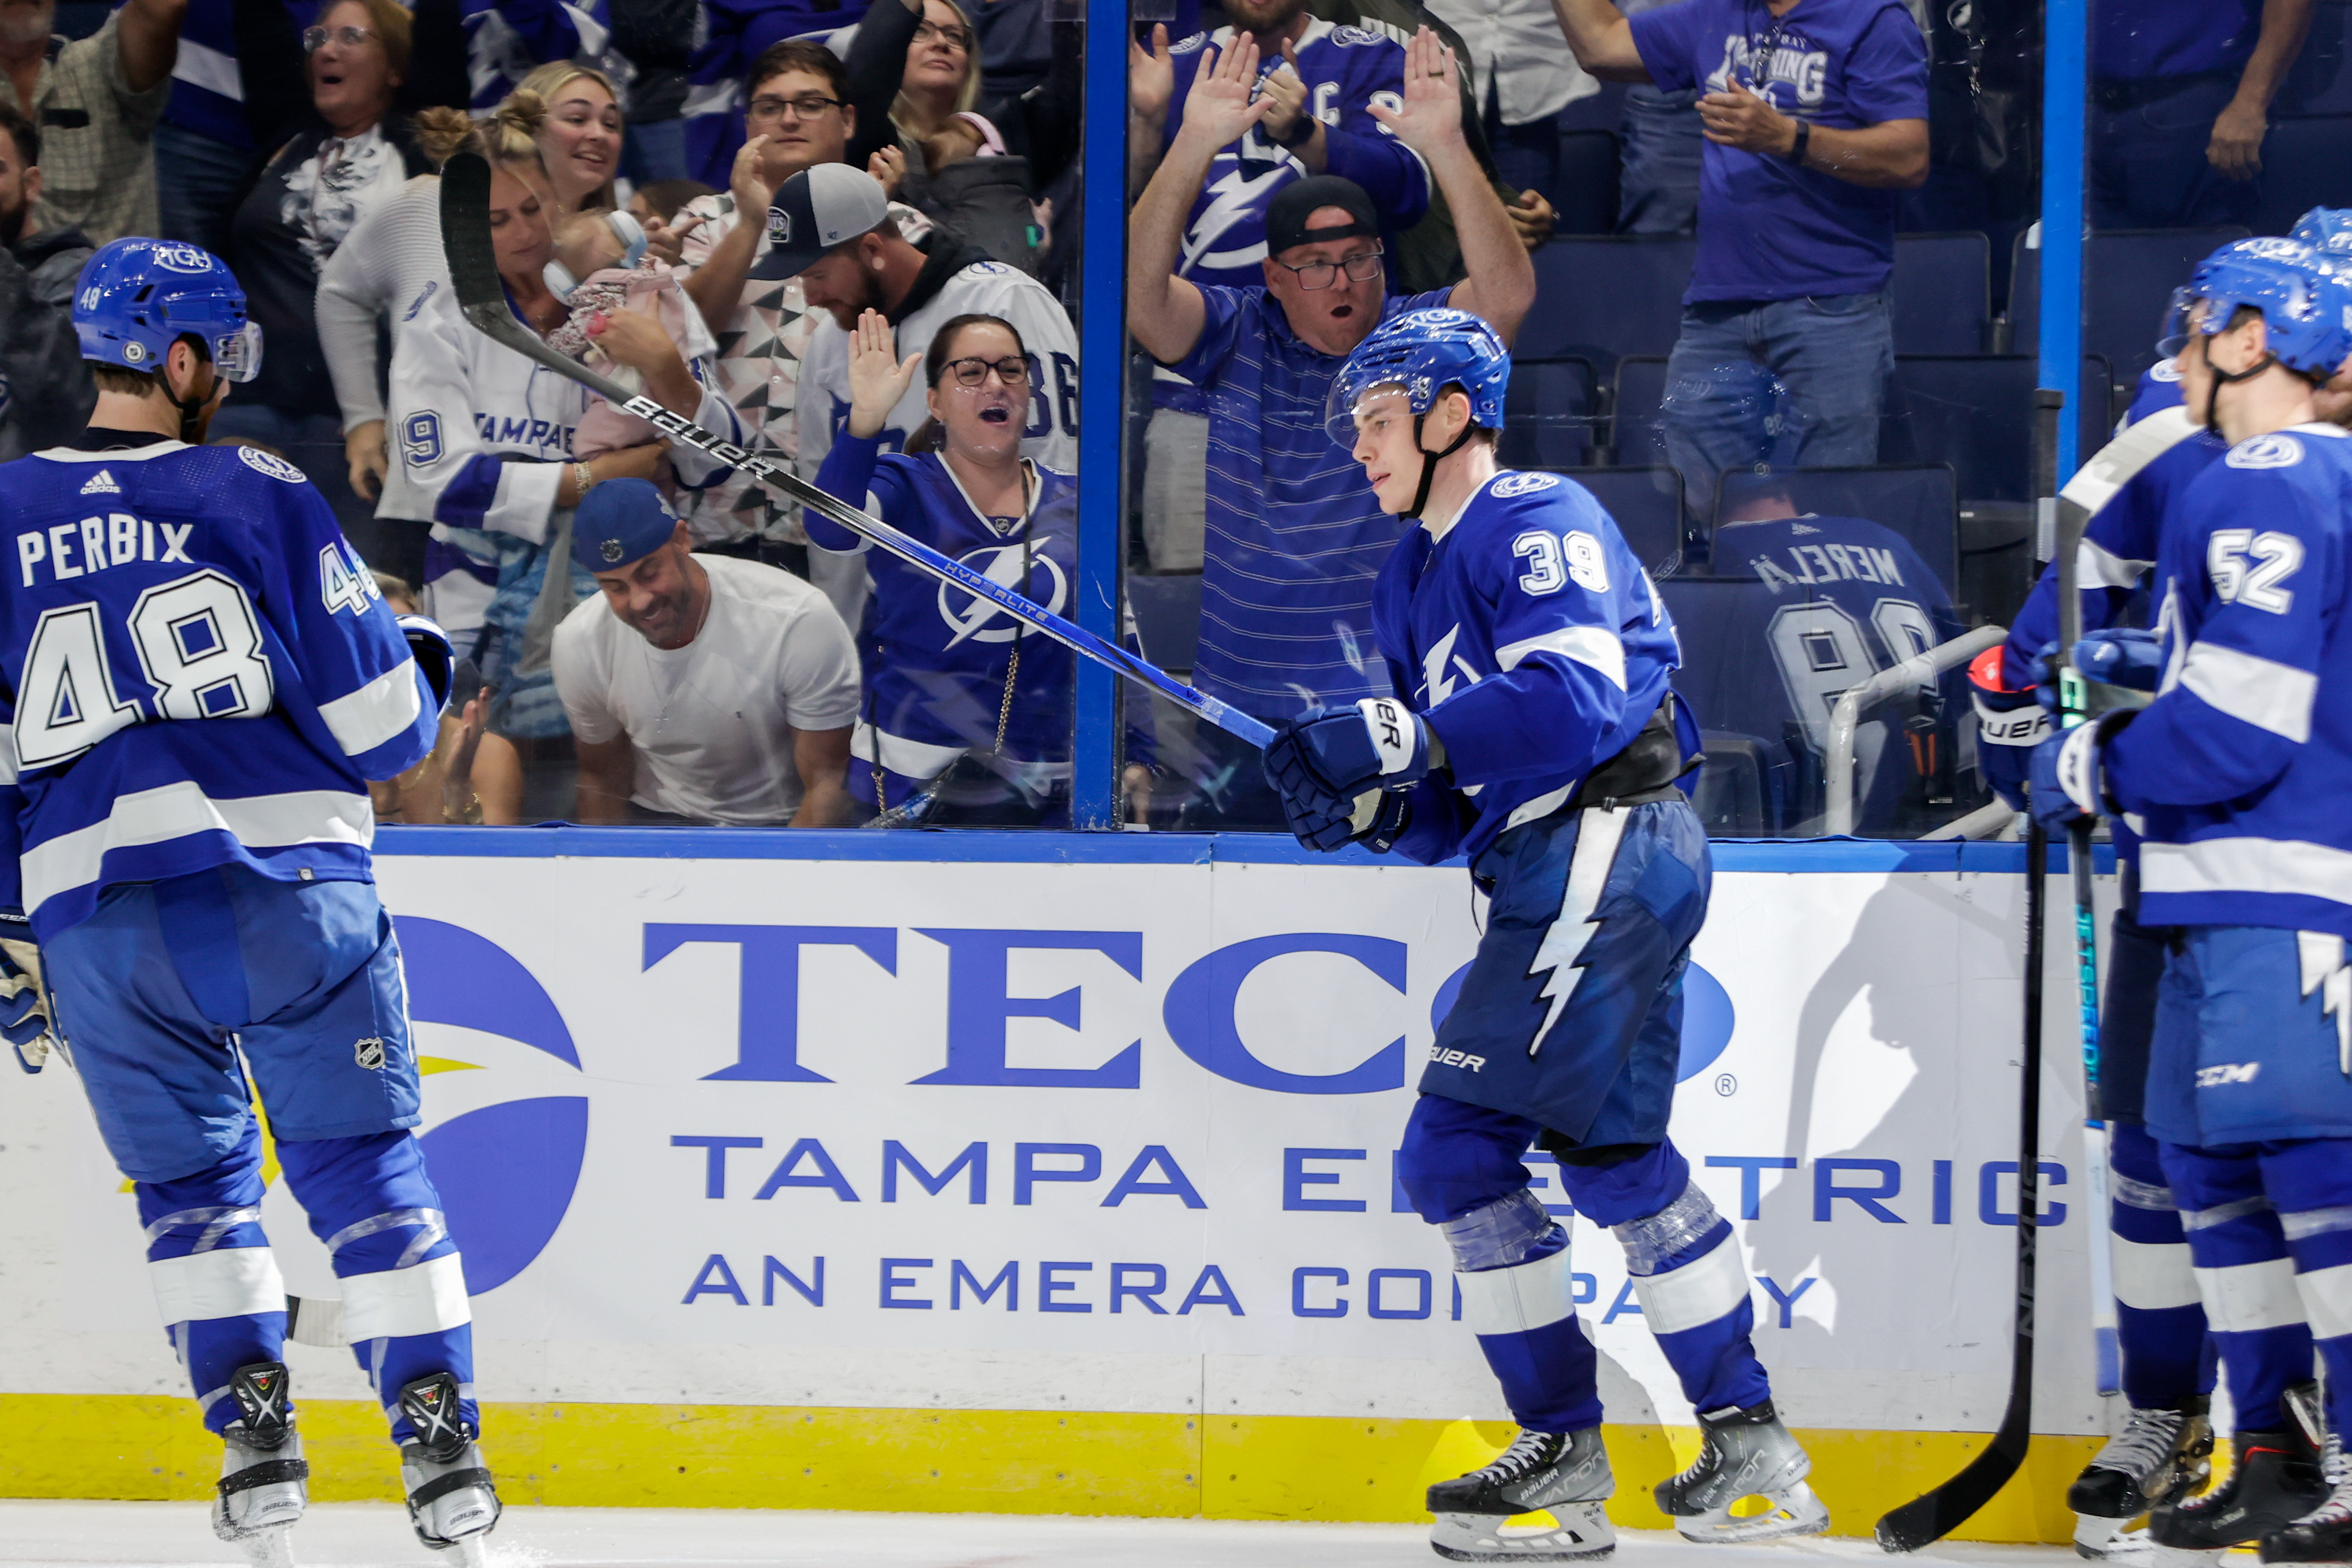 Lightning finalize opening-night roster, which has several new faces